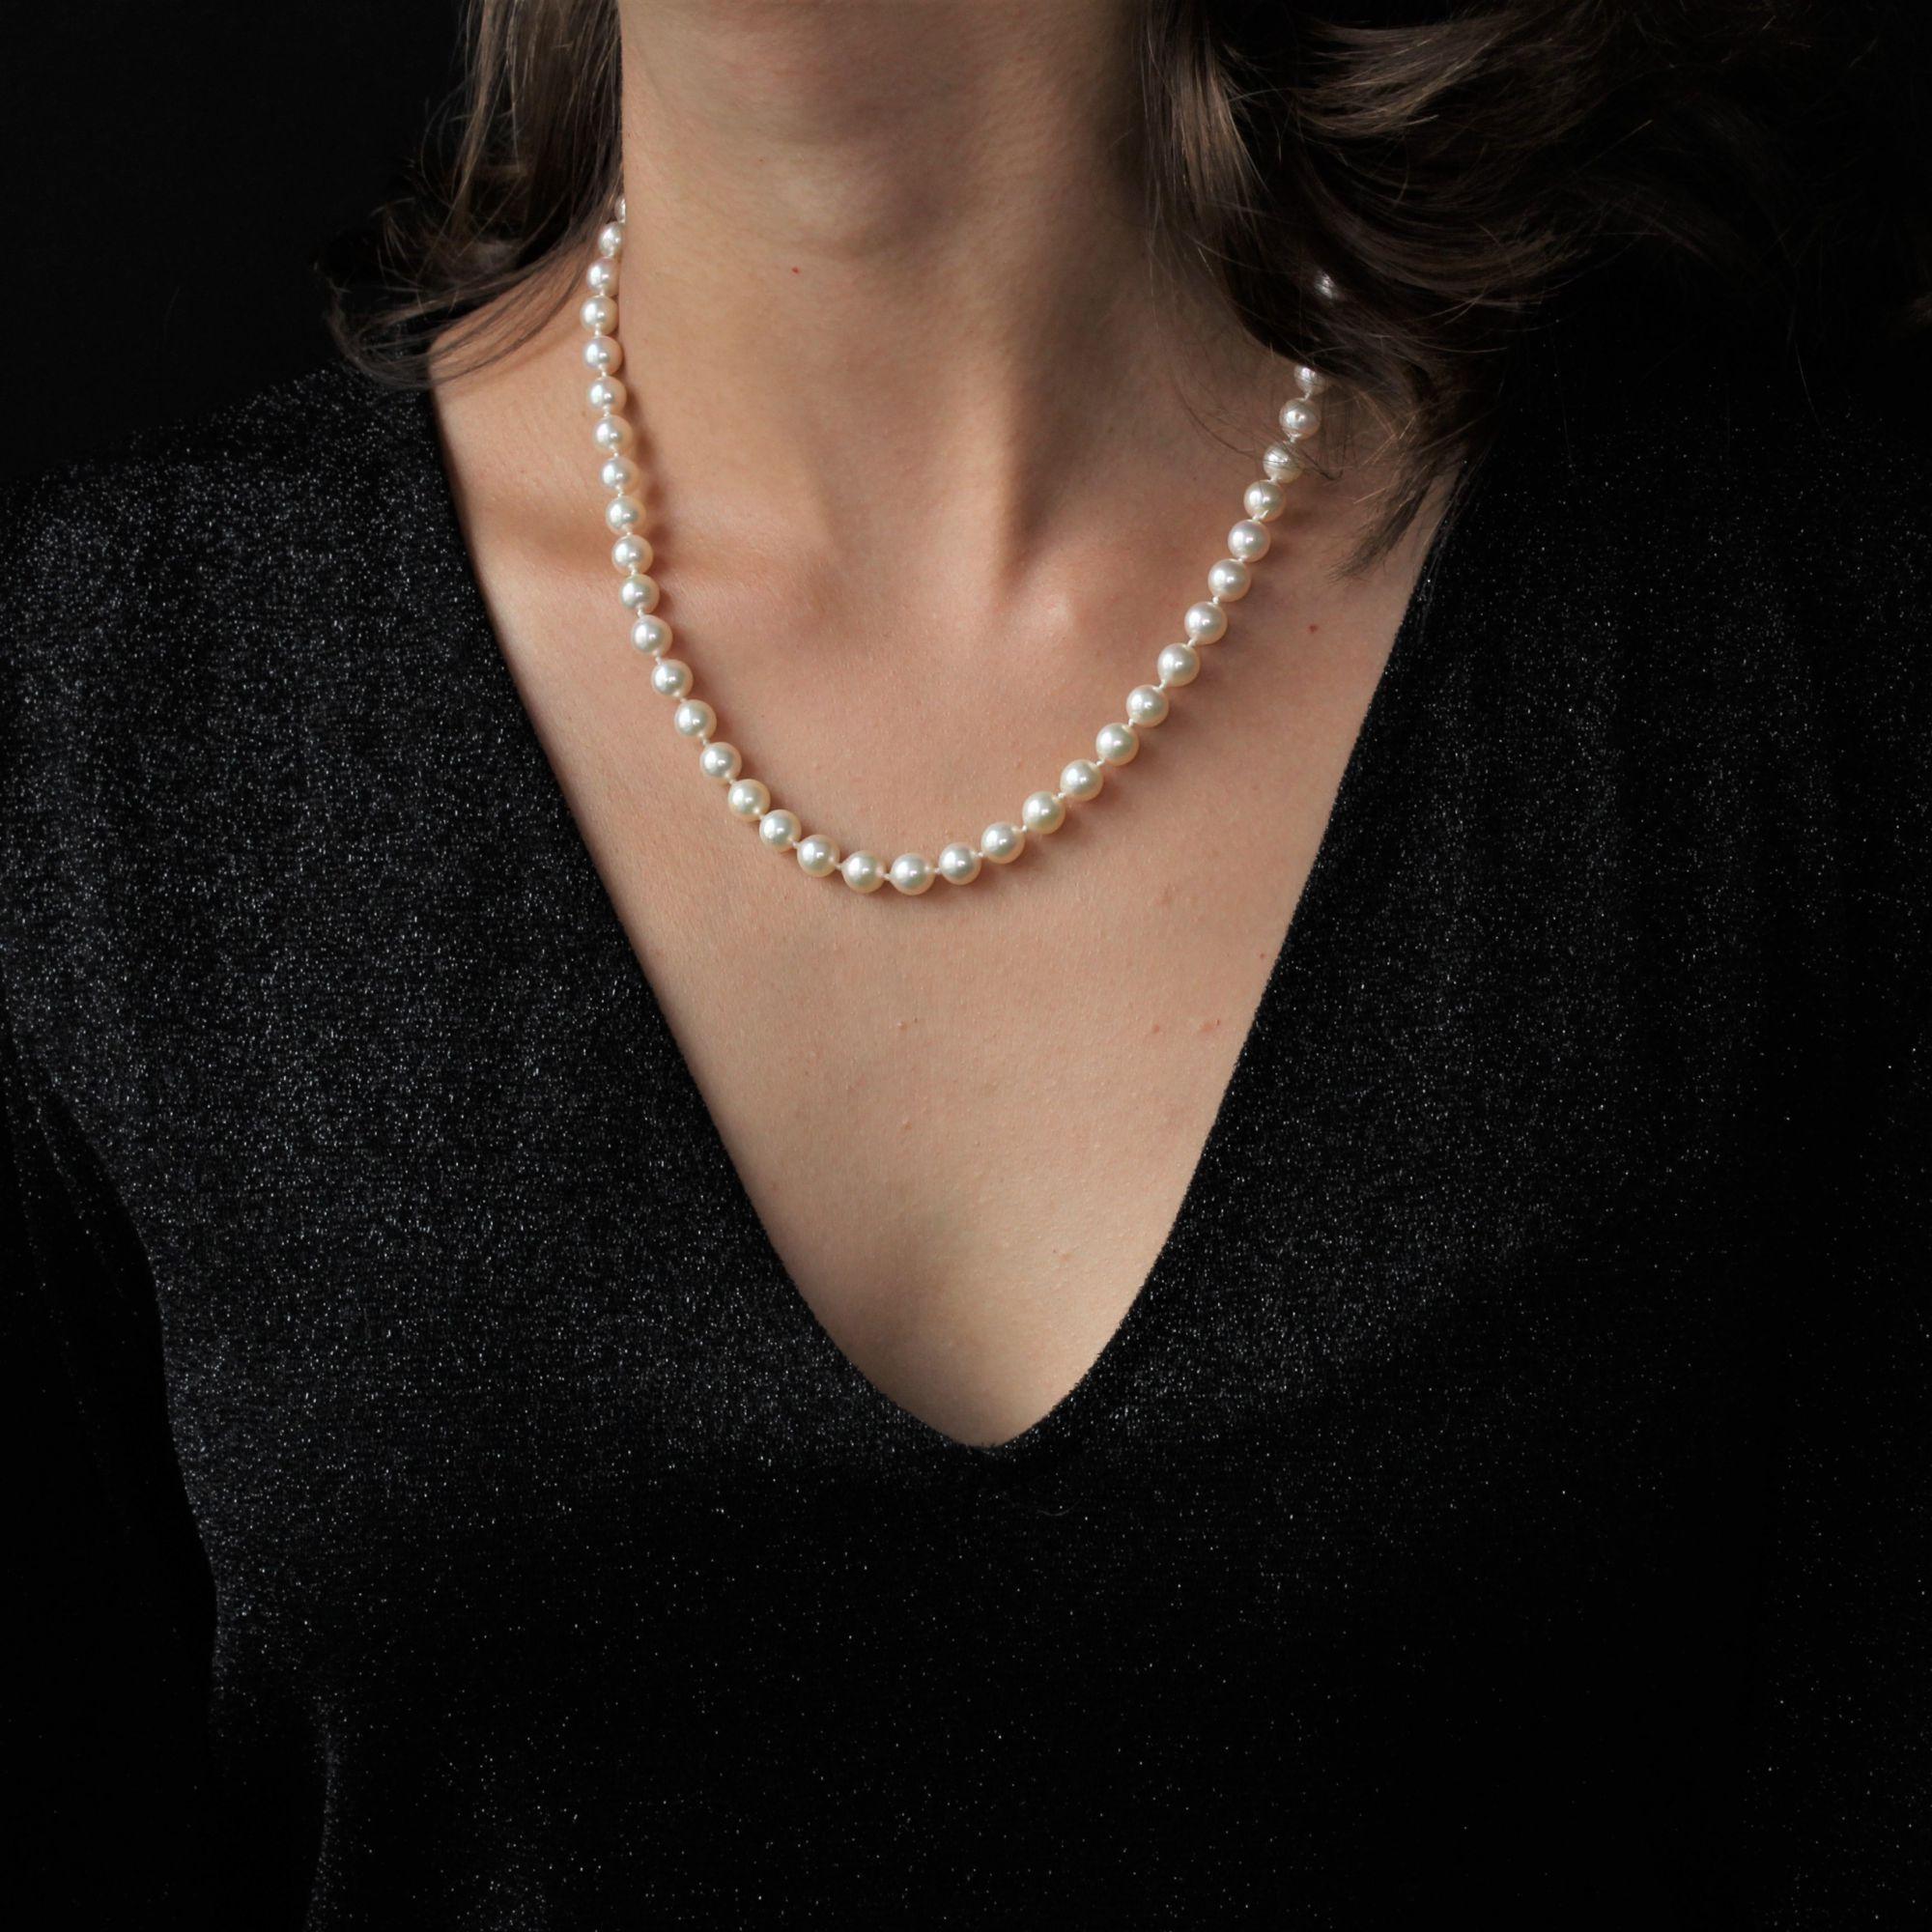 White nuanced orient cultured pearls choker necklace.
The hanging system is in the form of a rosette in 18 karat white gold, owl hallmark, whose center is adorned with a cultured pearl white nuanced. The palmettes are all set with antique